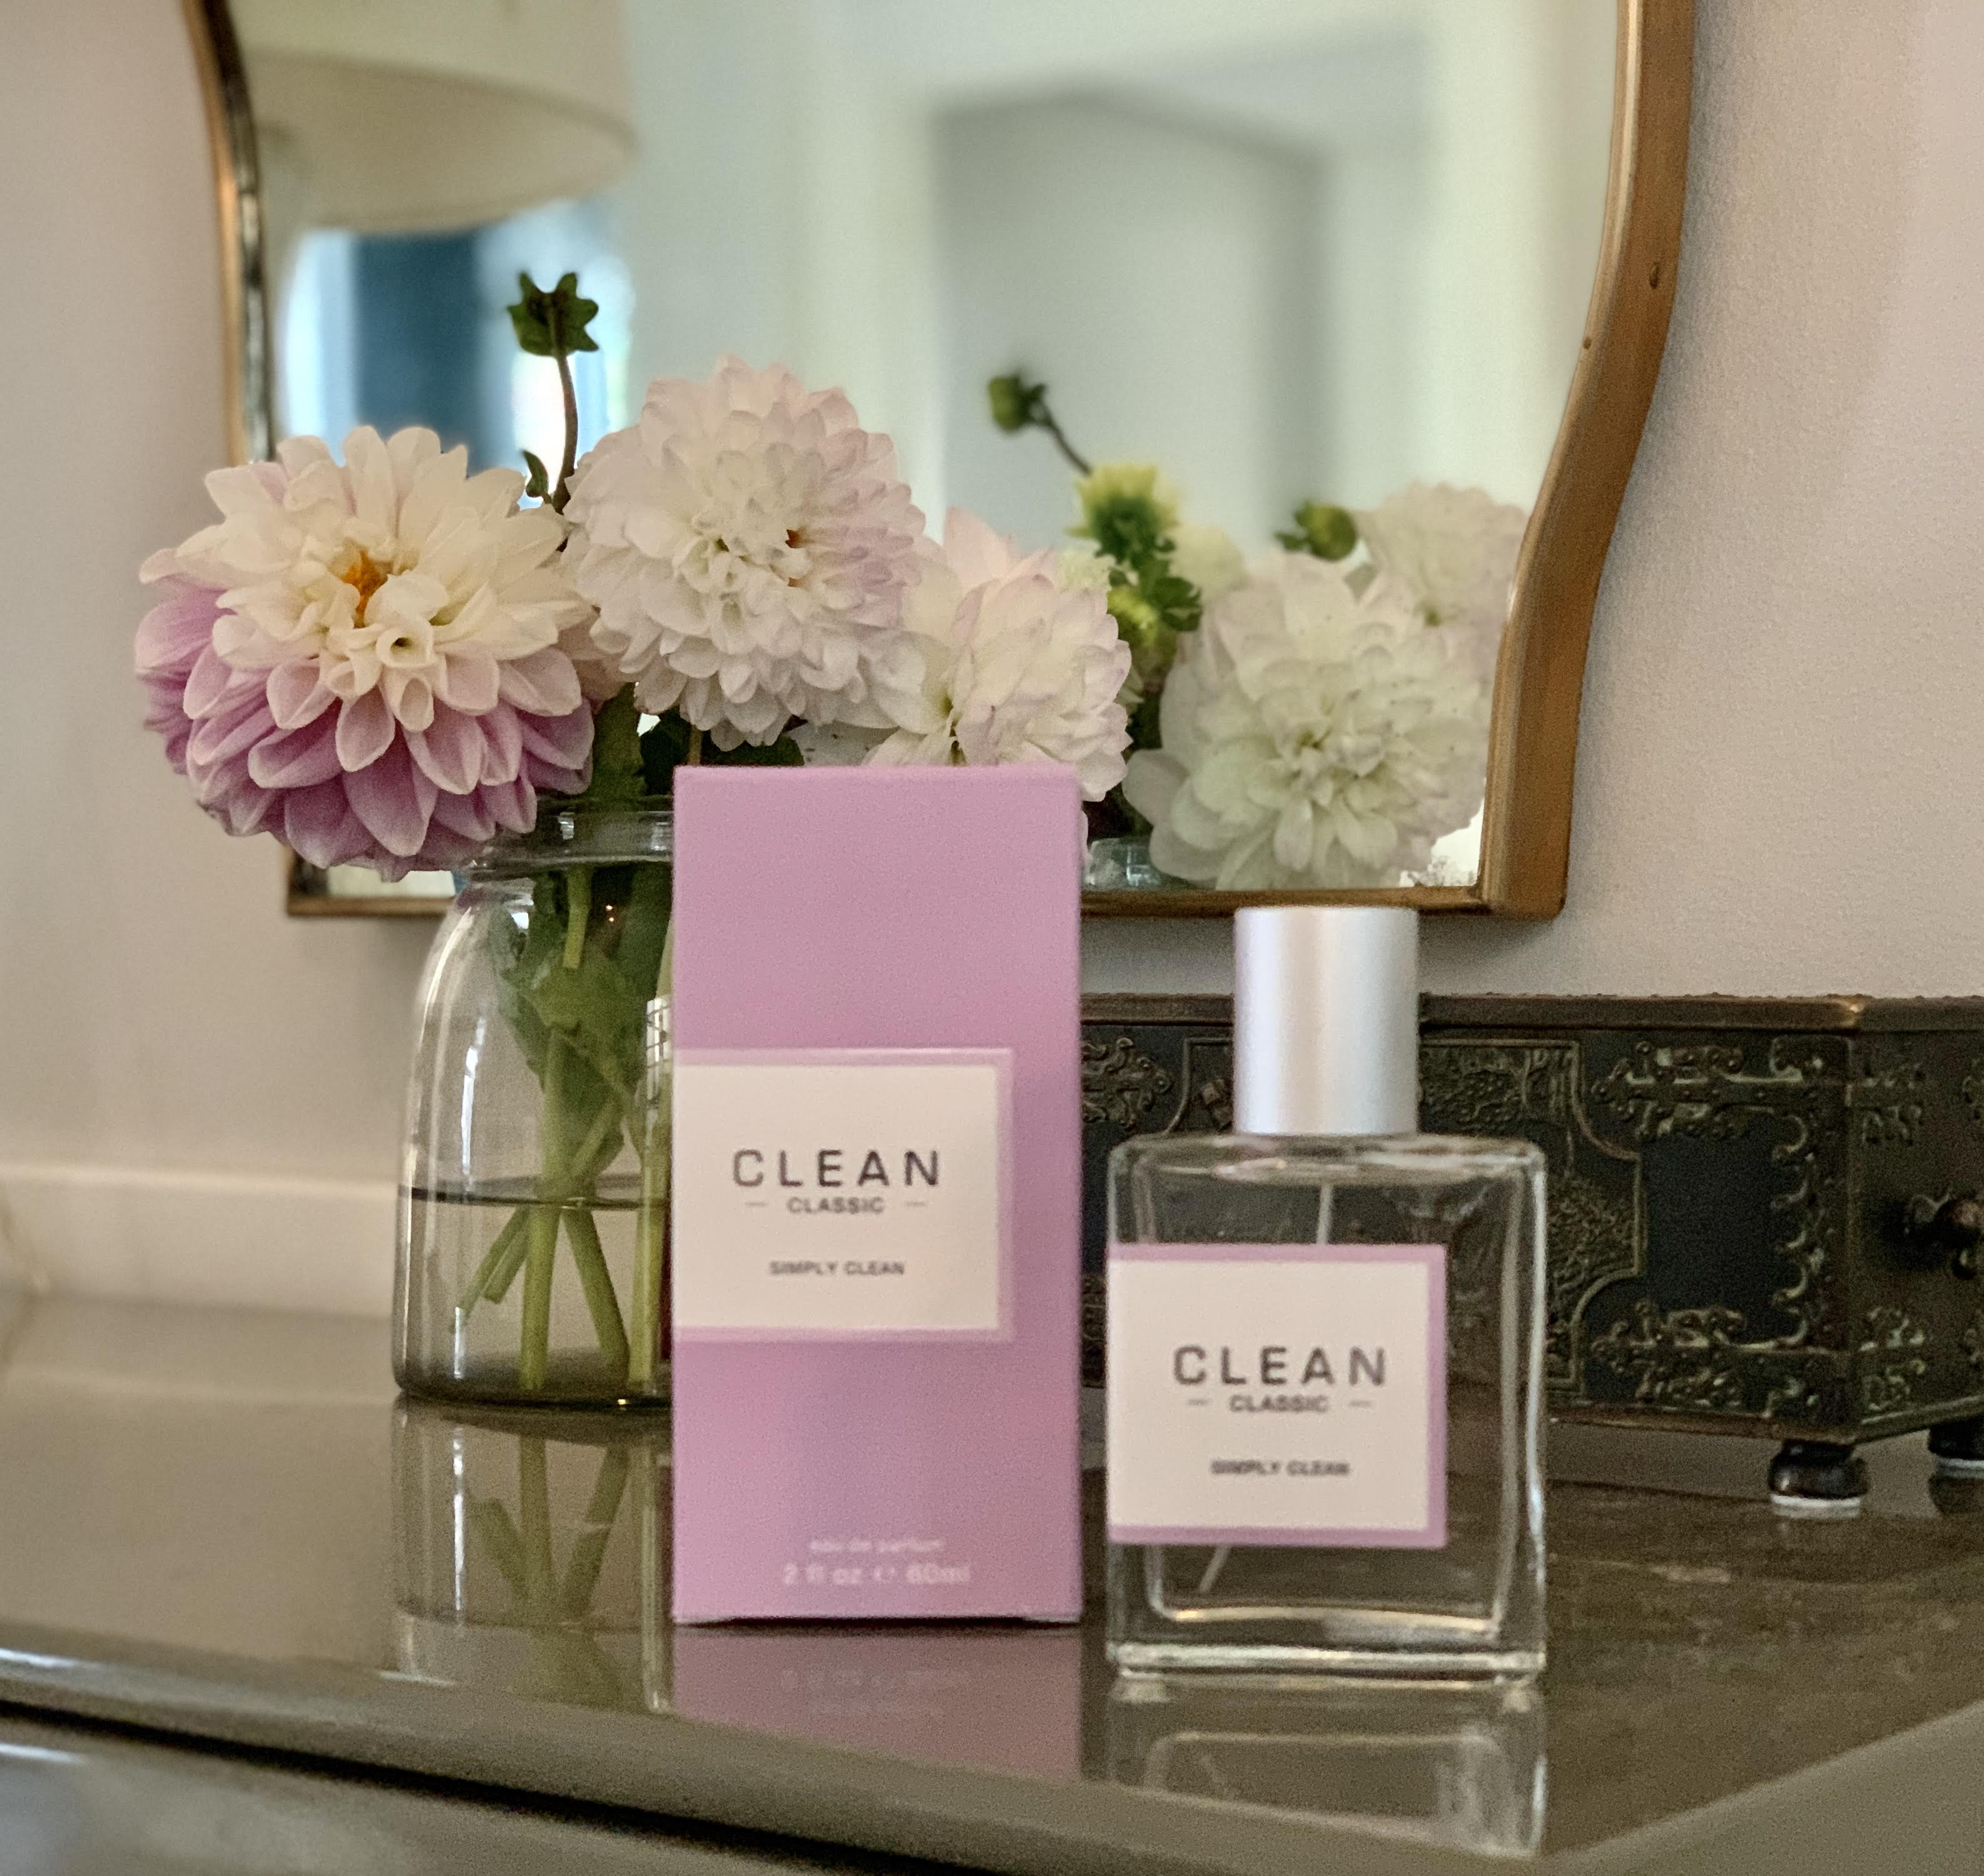 Simply Clean, Clean, parfume, konkurrence, duft,